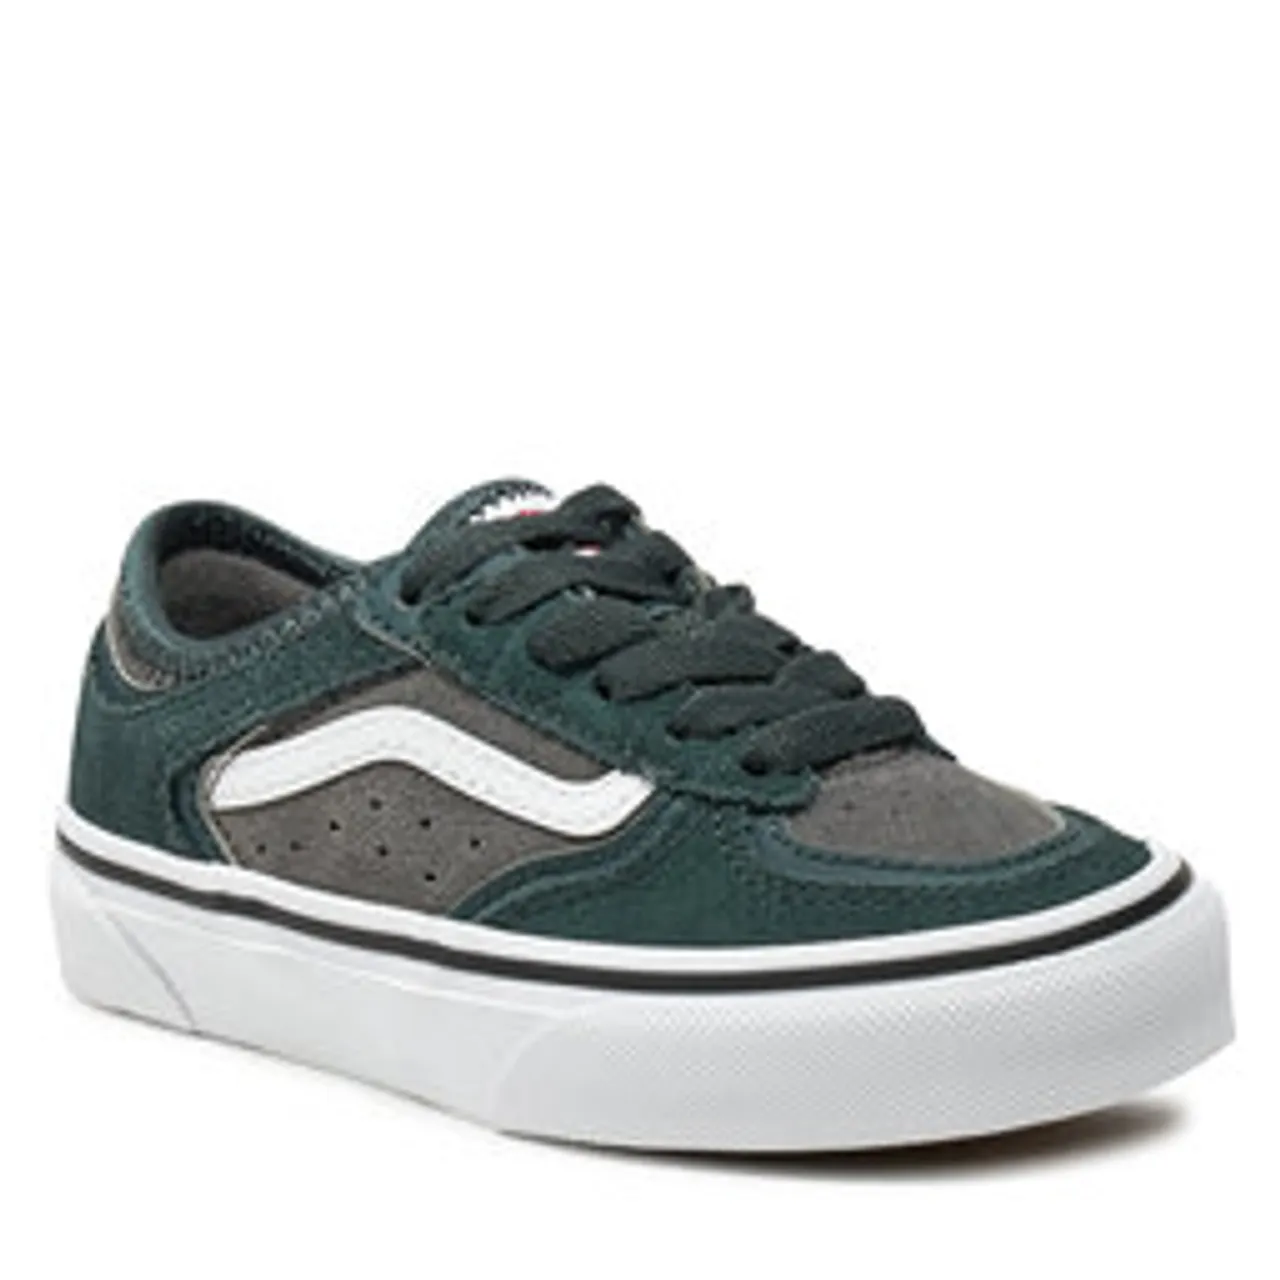 Sneakers aus Stoff Vans Uy Rowley Classic VN0A4BU9KQD1 Green Gables/White